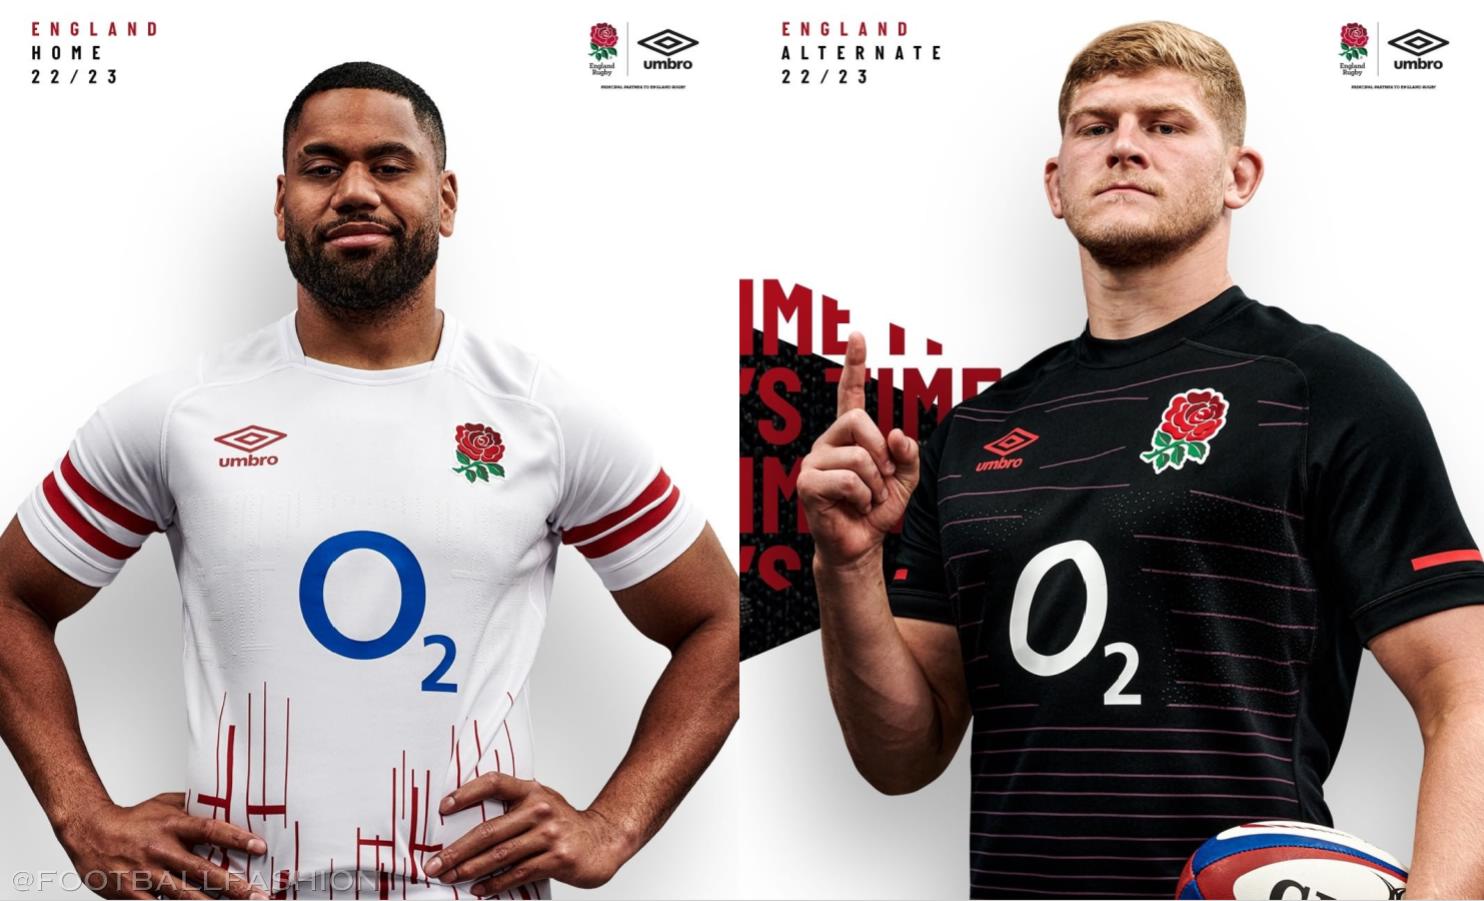 england rugby tour 2022